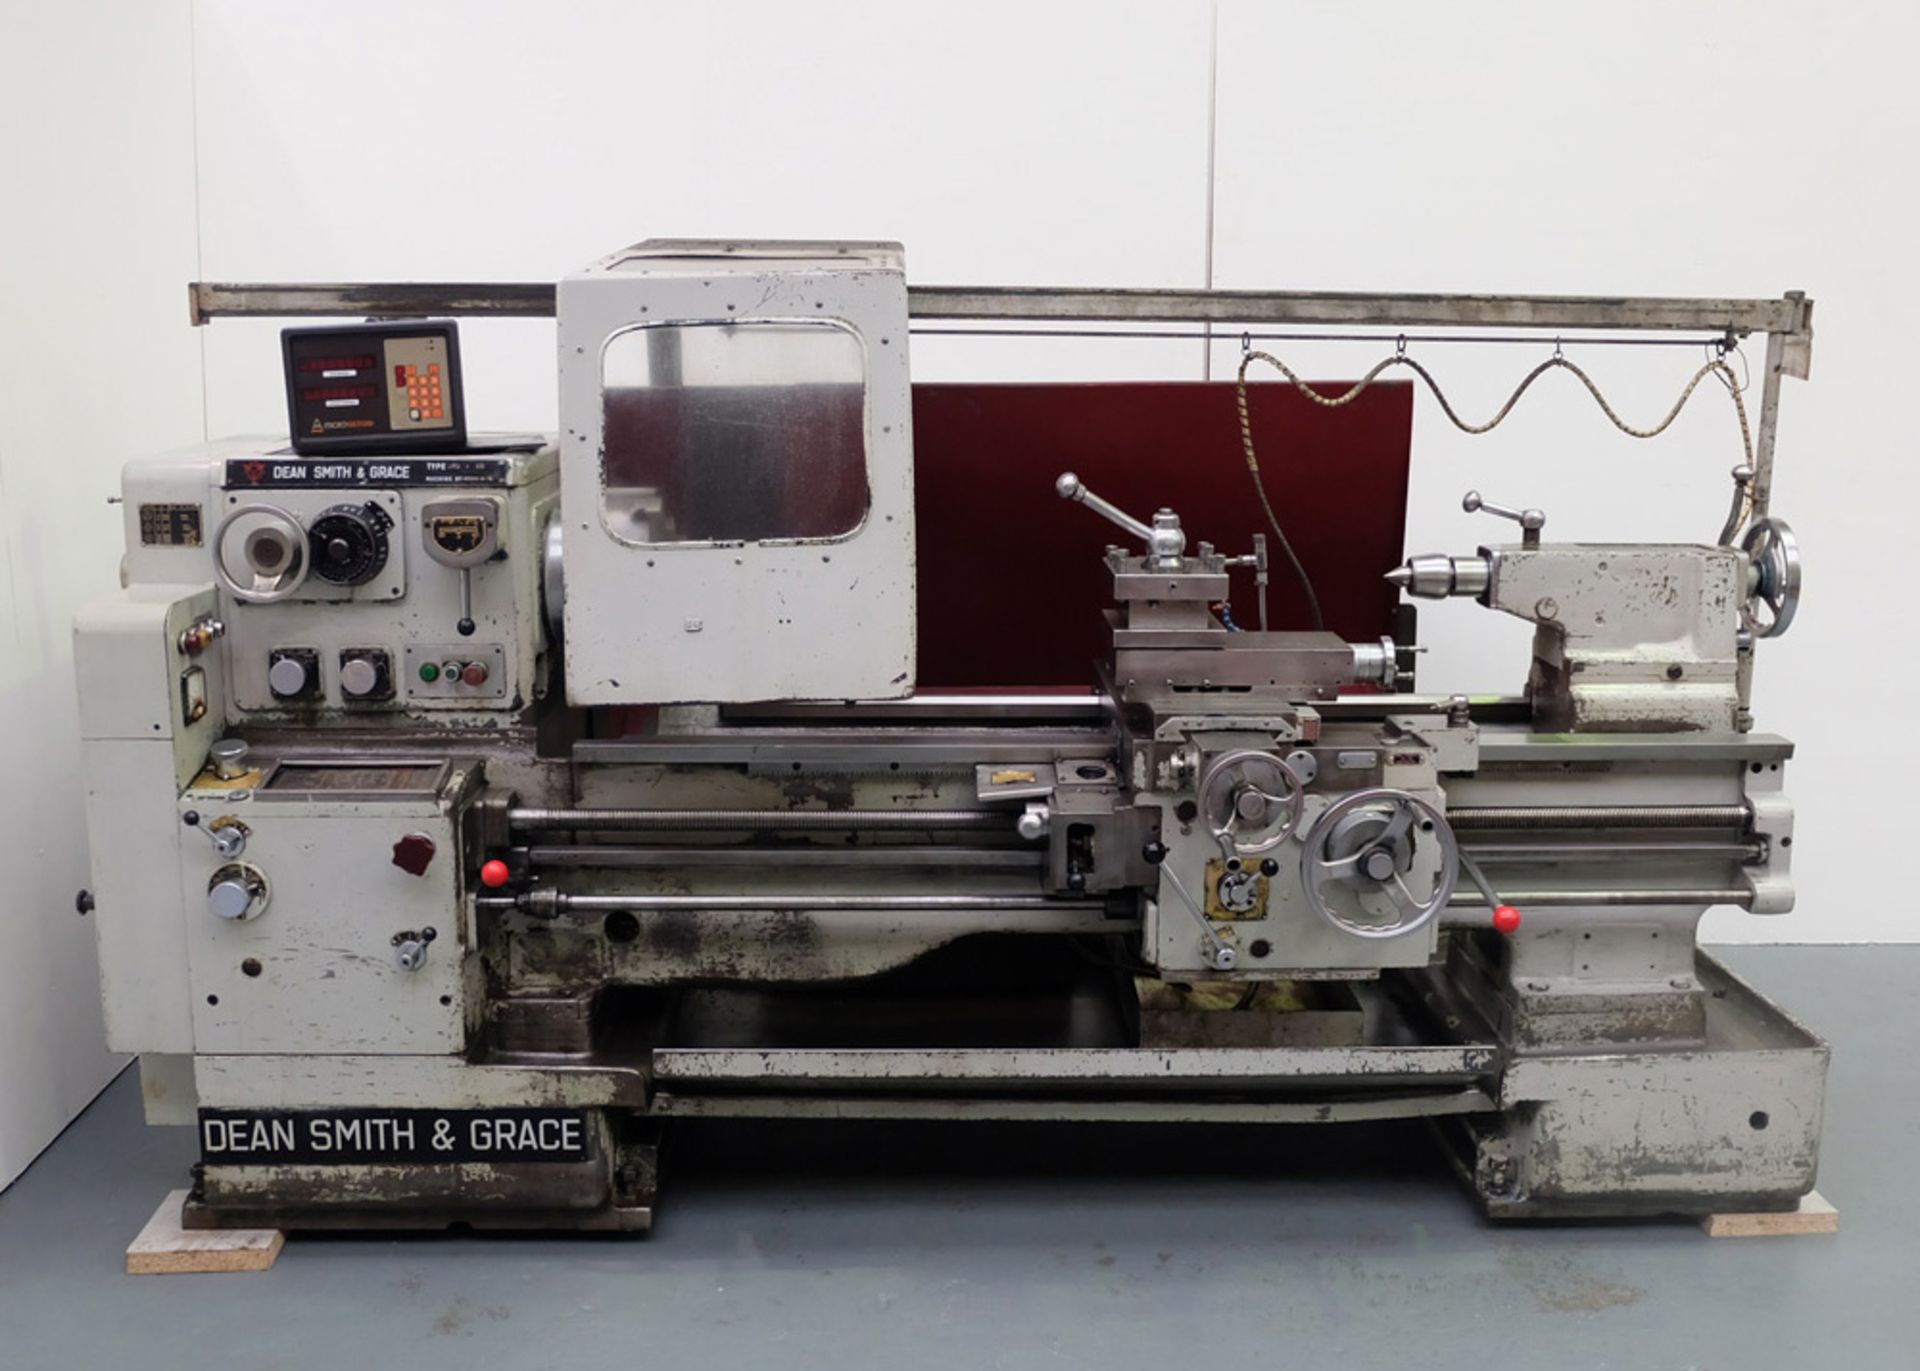 Dean Smith & Grace Type 2112 x 60. Straight Bed Centre Lathe. Distance Between Centres 60".